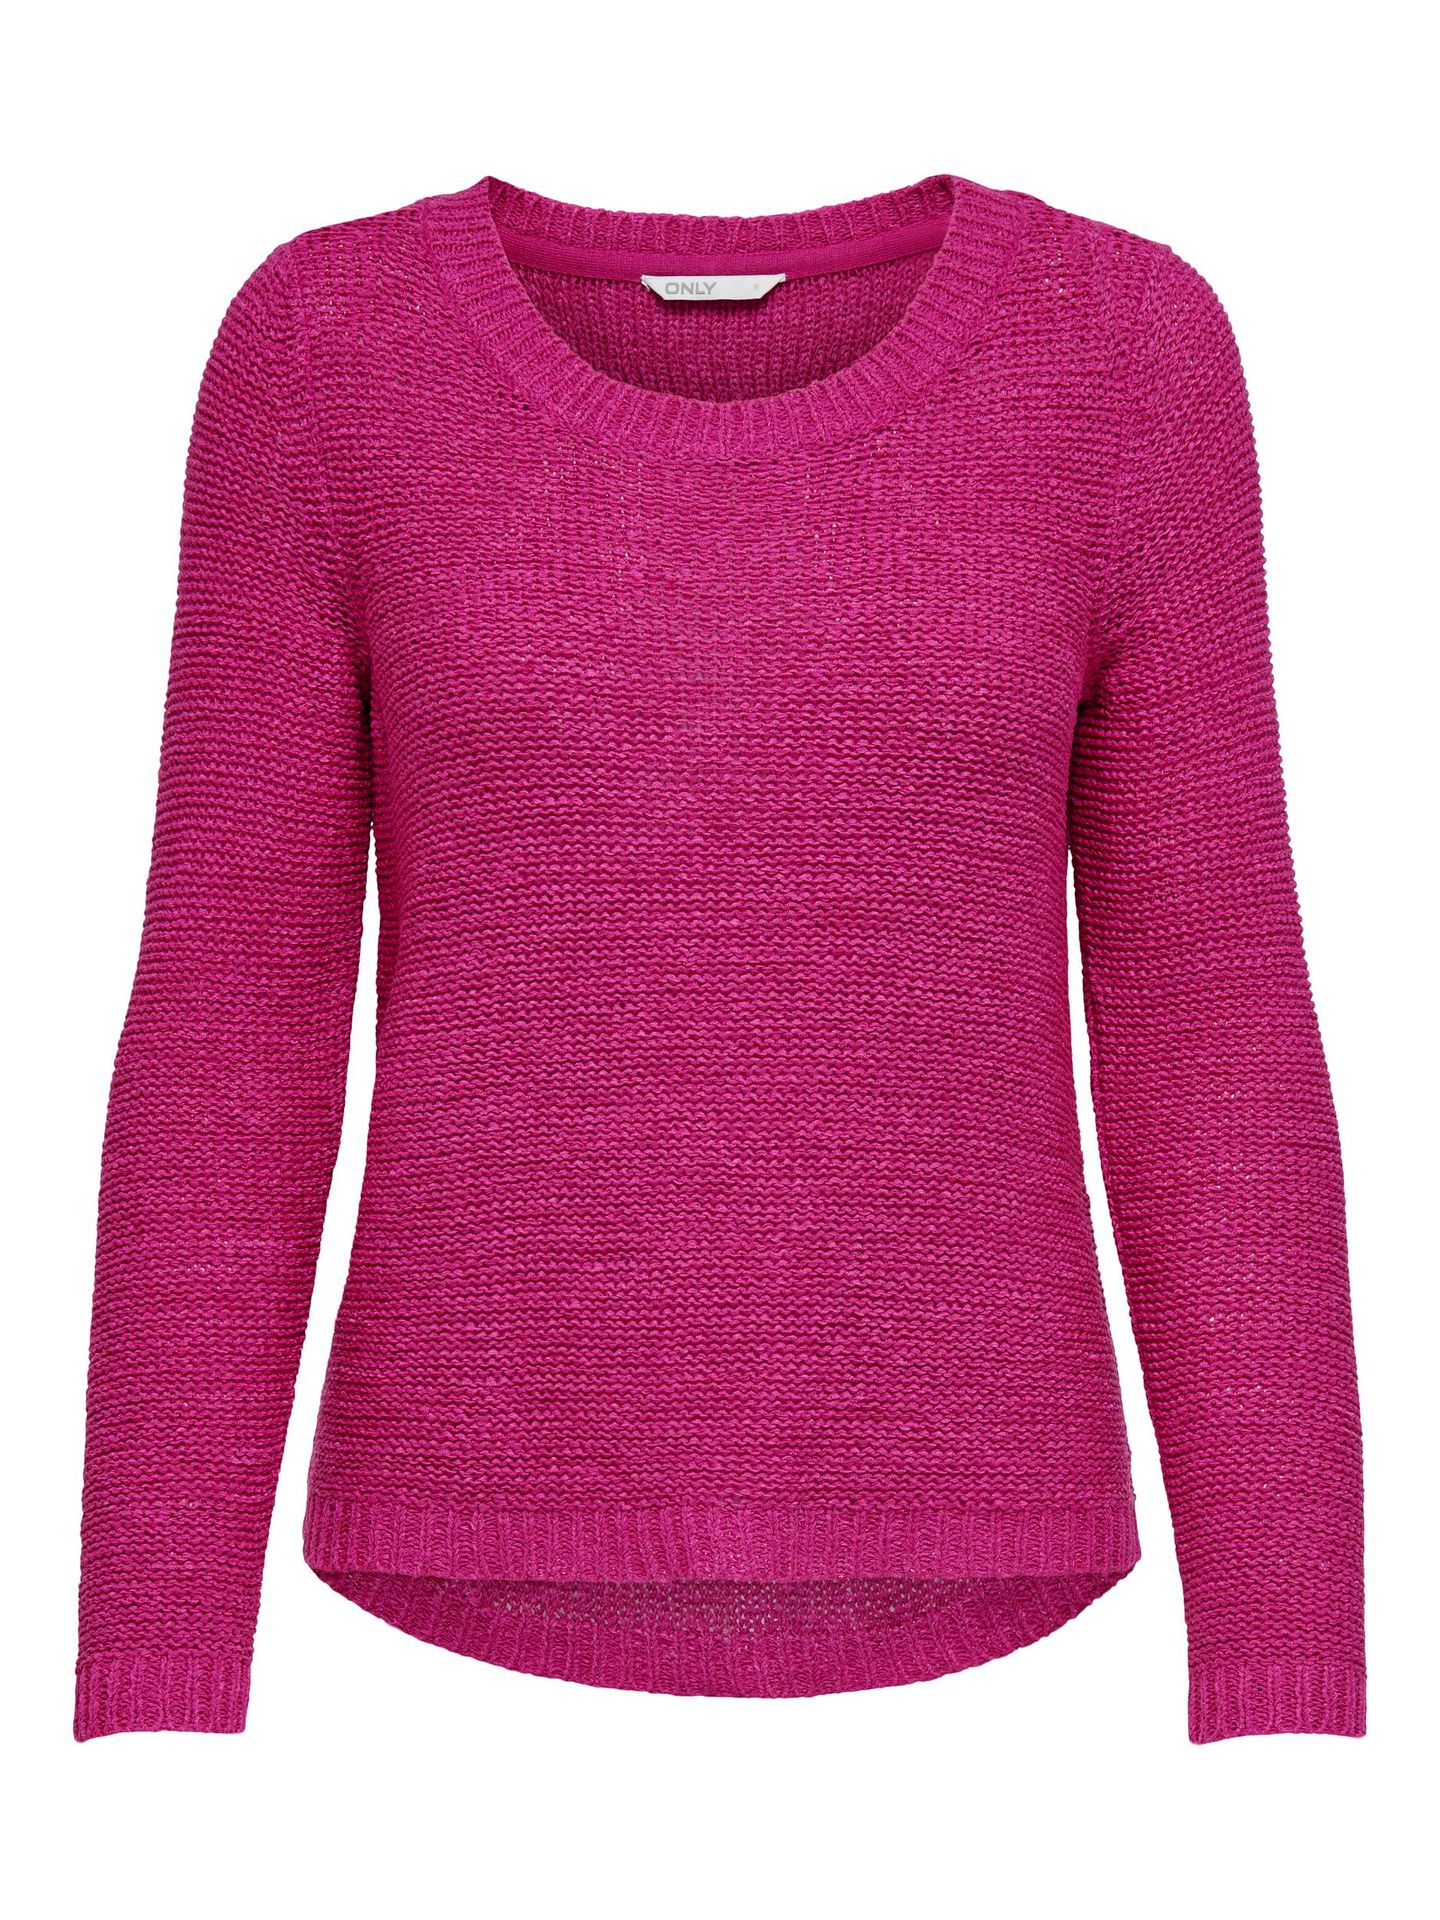 Only ONLGEENA XO L/S PULLOVER KNT NOOS Raspberry Rose 00102390-EKA26011400002063